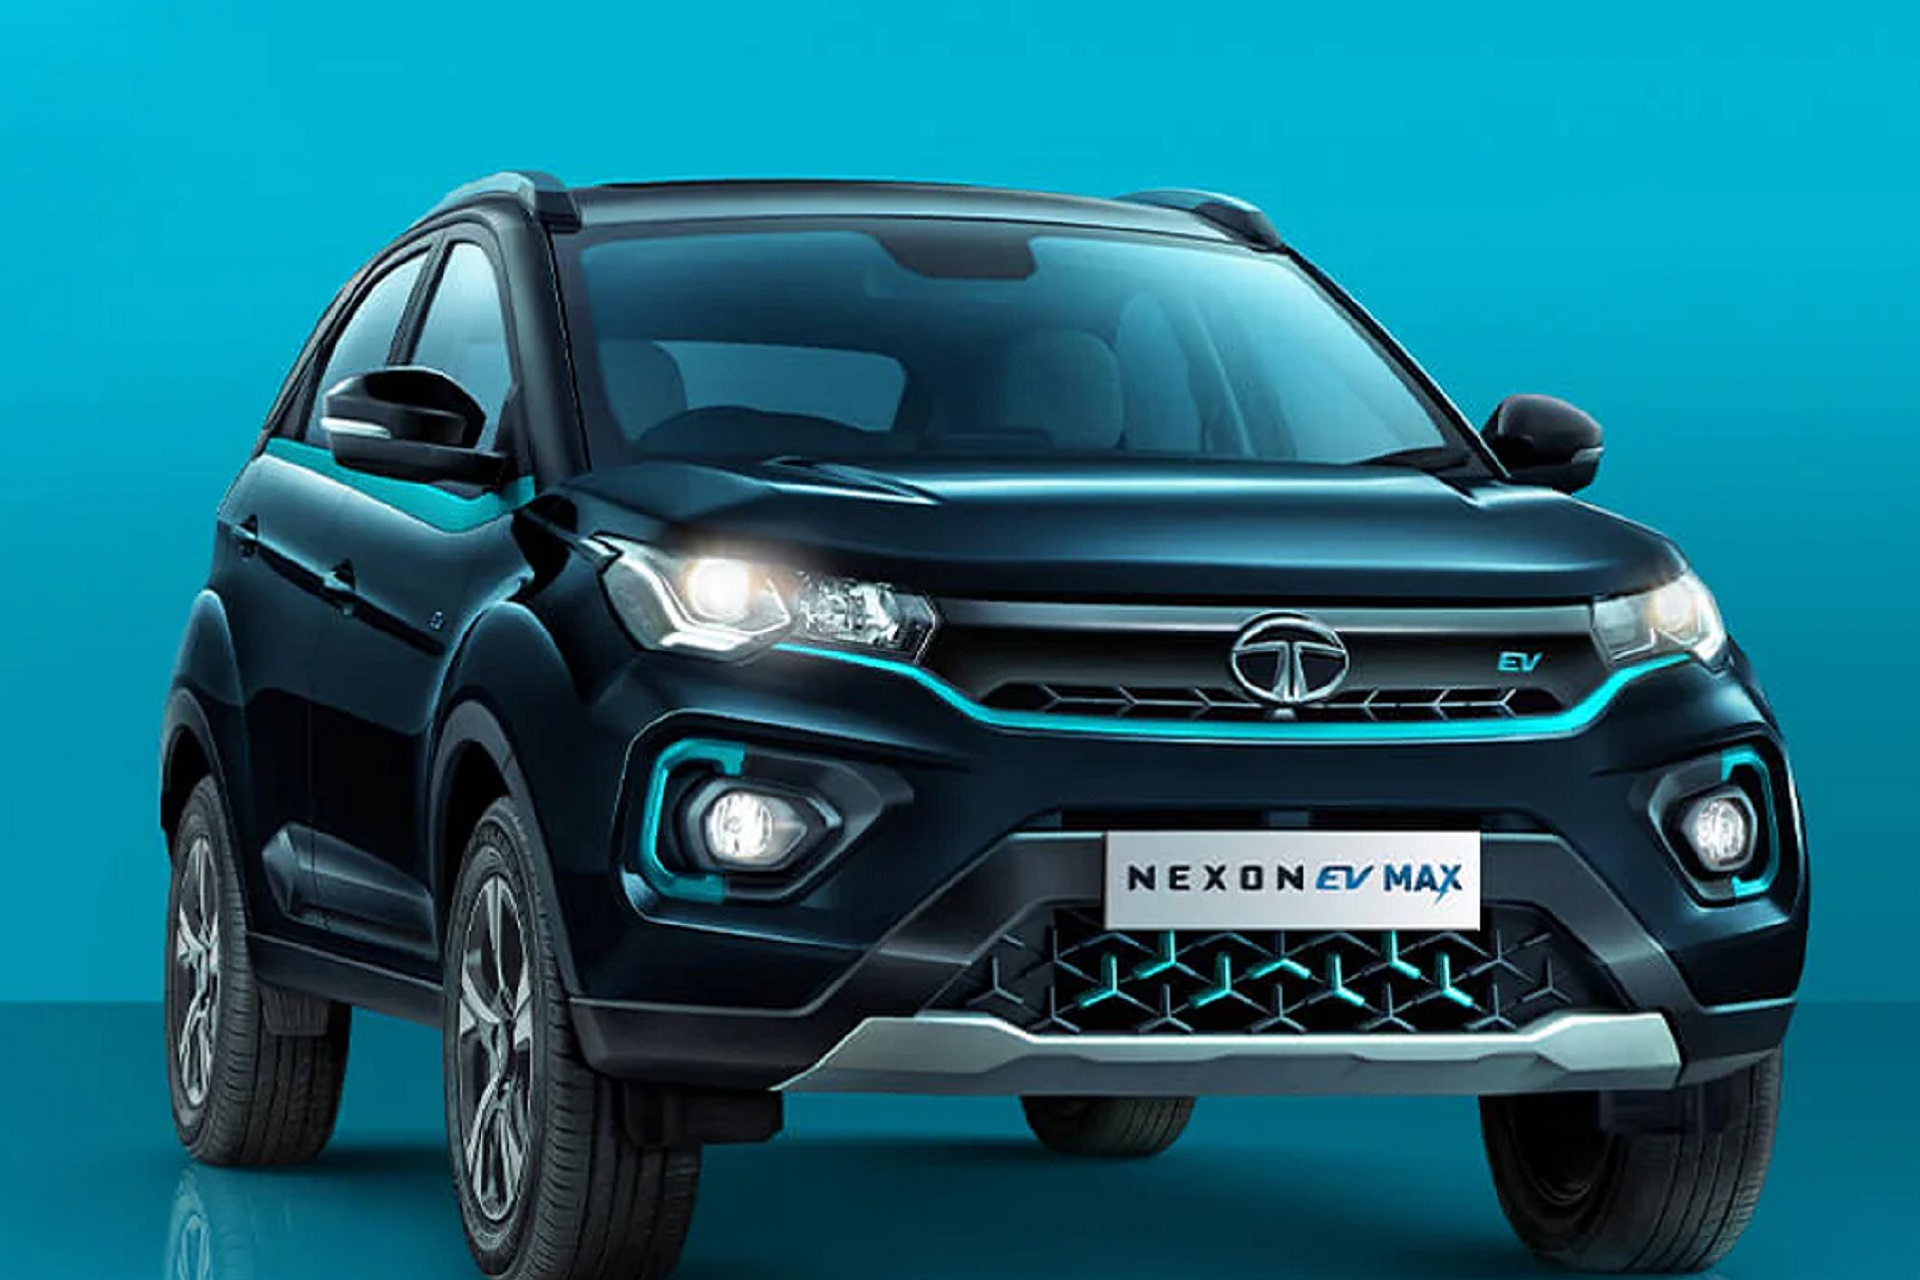 The New Tata Nexon EV Max Arrives & Here Are The Details